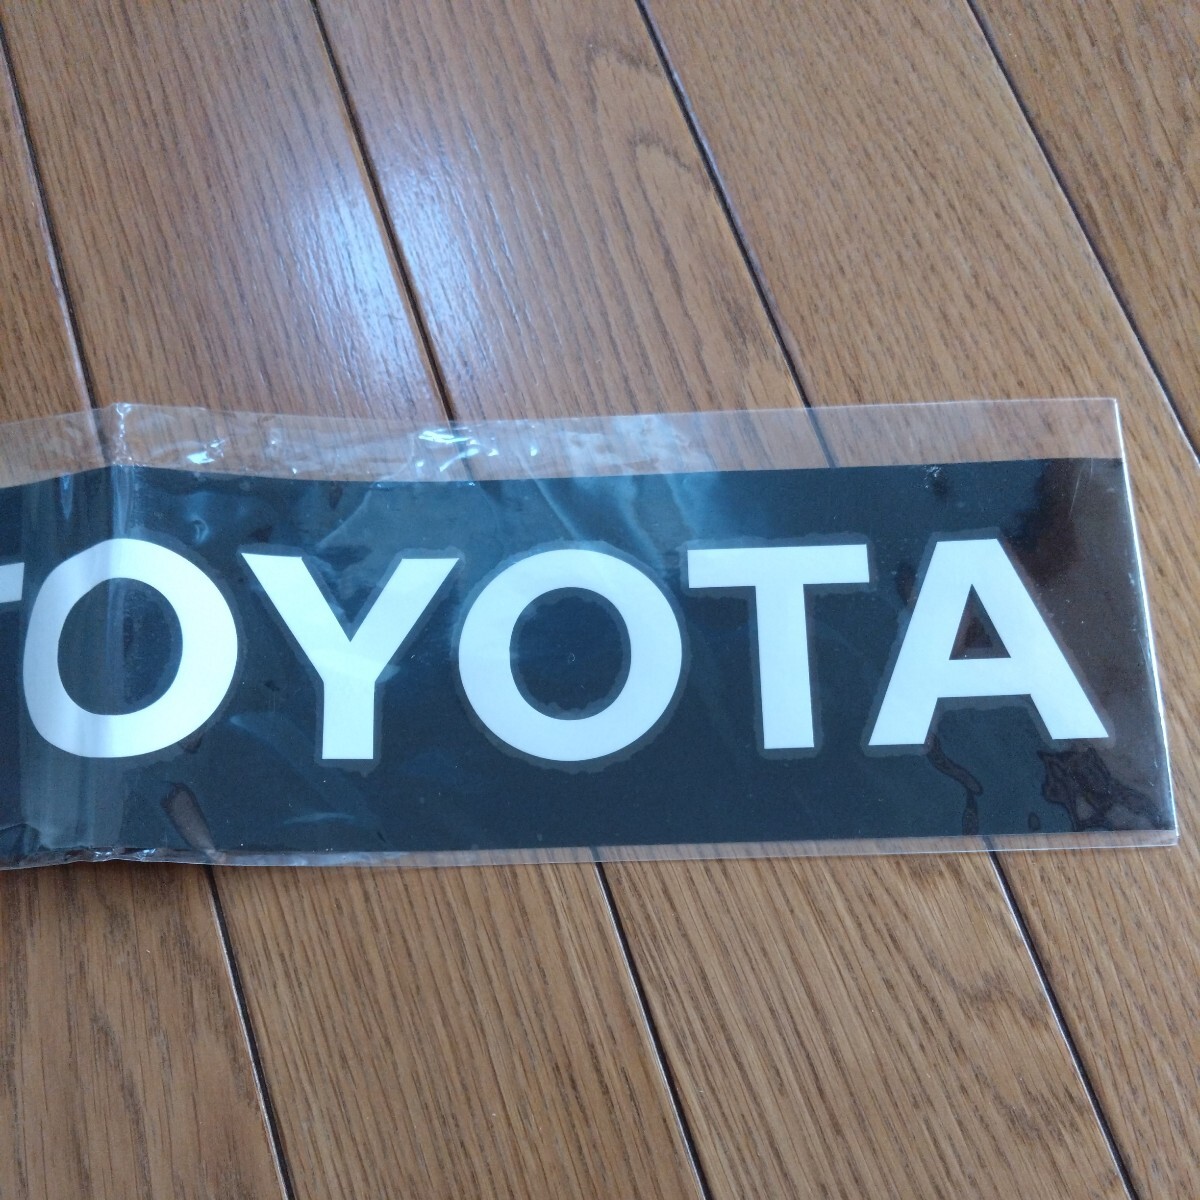  Toyota emblem britain character sticker seal approximately 7mm×37mm 1 sheets TOYOTA( white ) white character car 